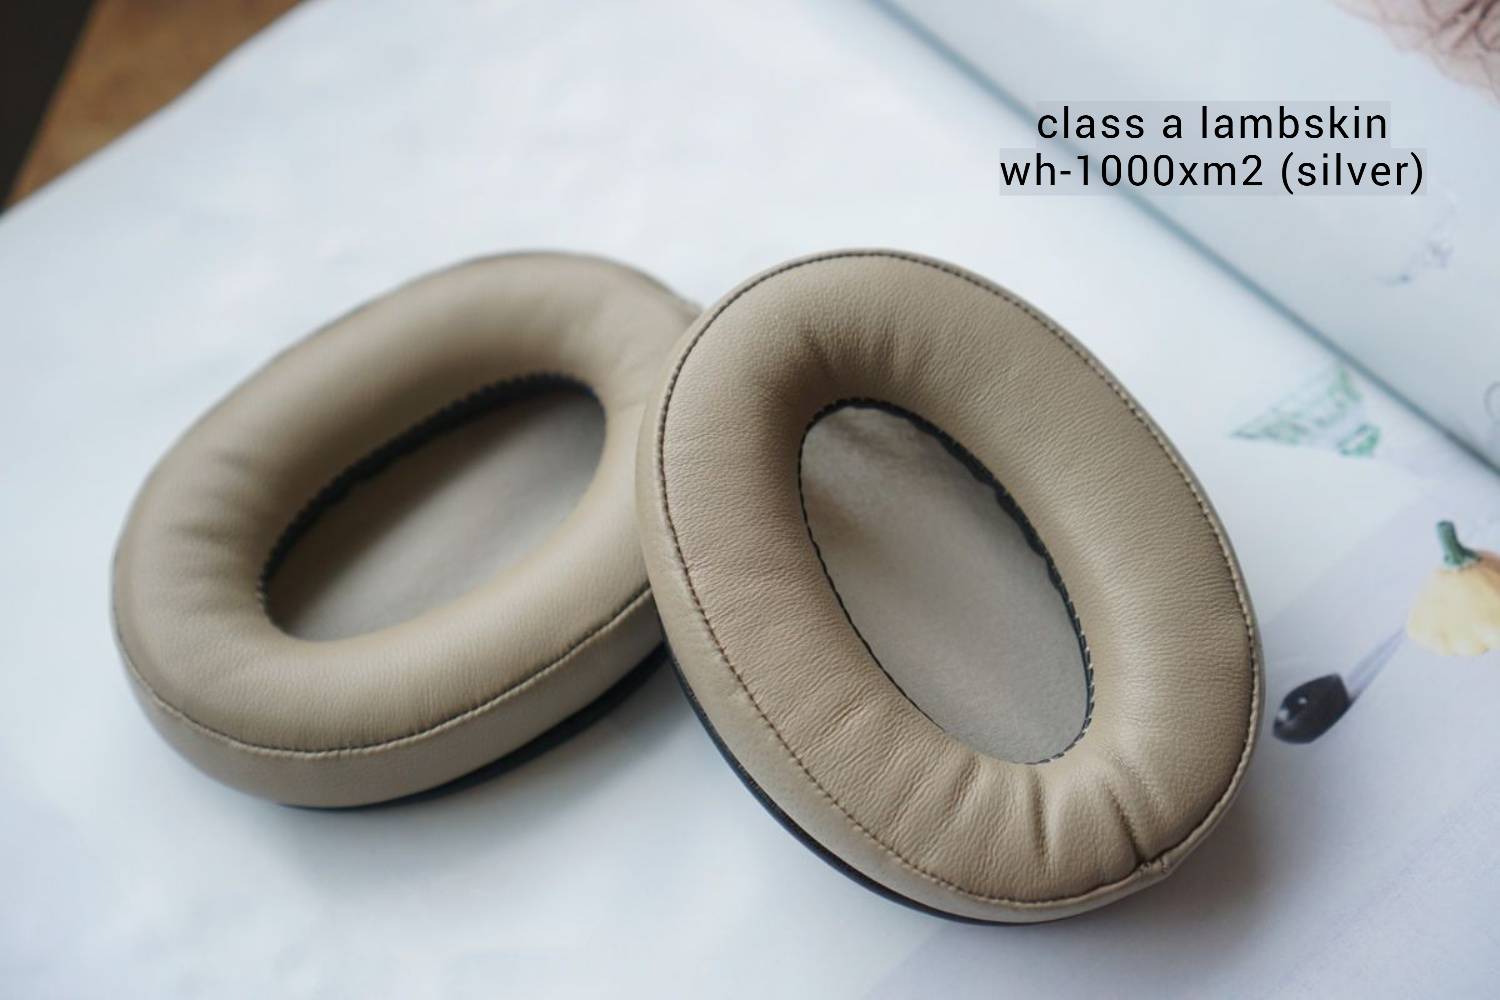 (Class S / A Lambskin) Sony WH-1000XM2 MDR-1000X Lambskin 3rd party Aftermarket Replacement Earpad